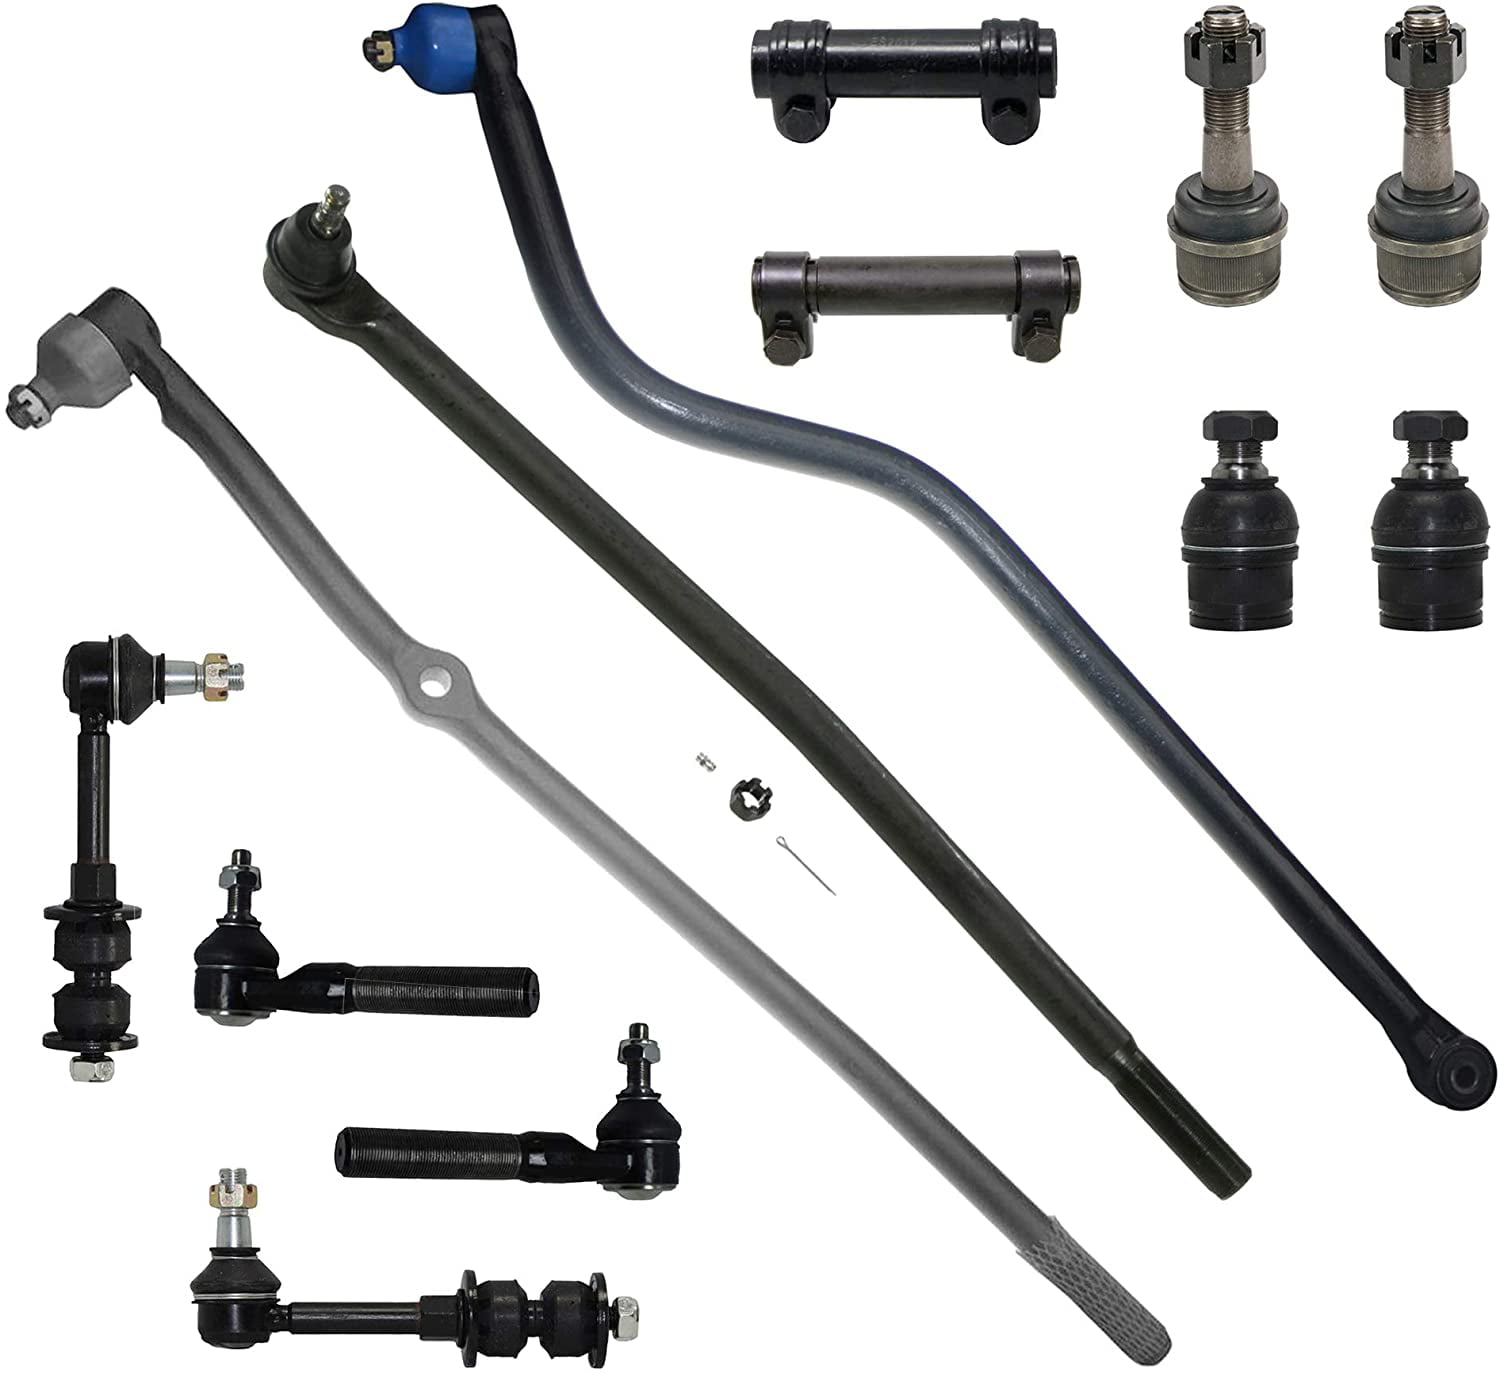 Front Upper & Lower Ball Joints Inner Outer Tie Rod Drag Link Adjustment Sleeves & Sway Bars 13pc Kit Left & Right Side for 2000 2001 Dodge Ram 1500 4WD 